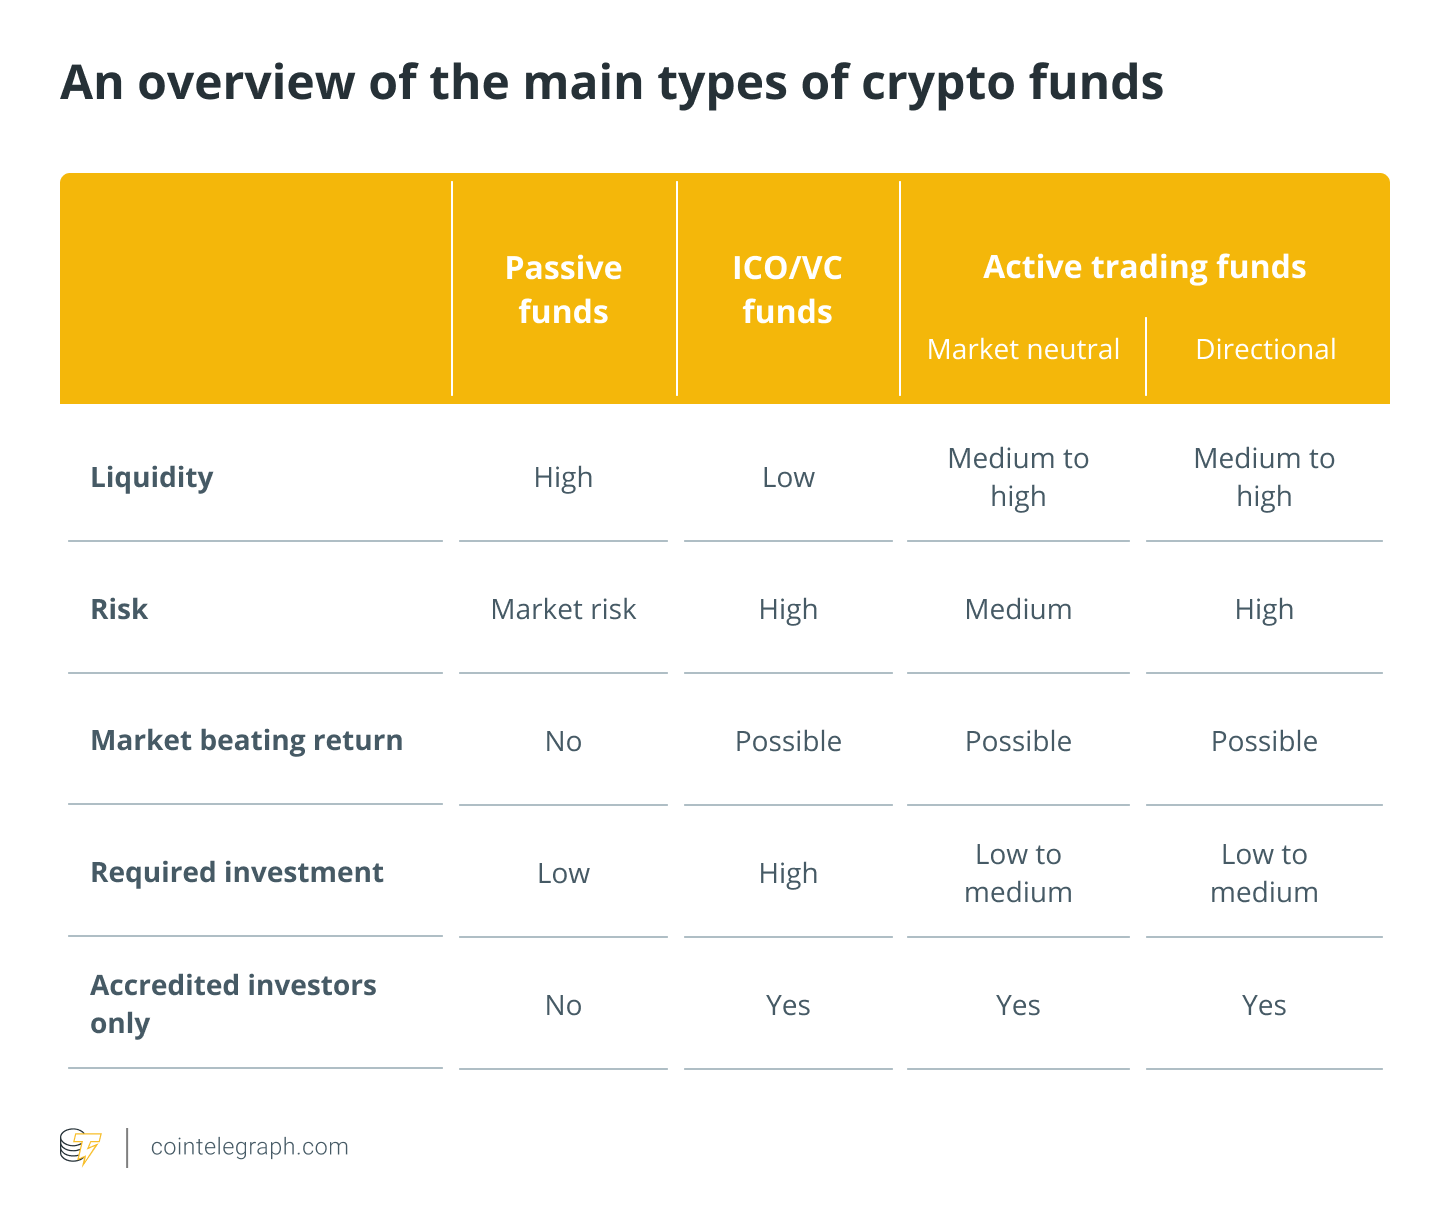 An overview of the main types of crypto funds